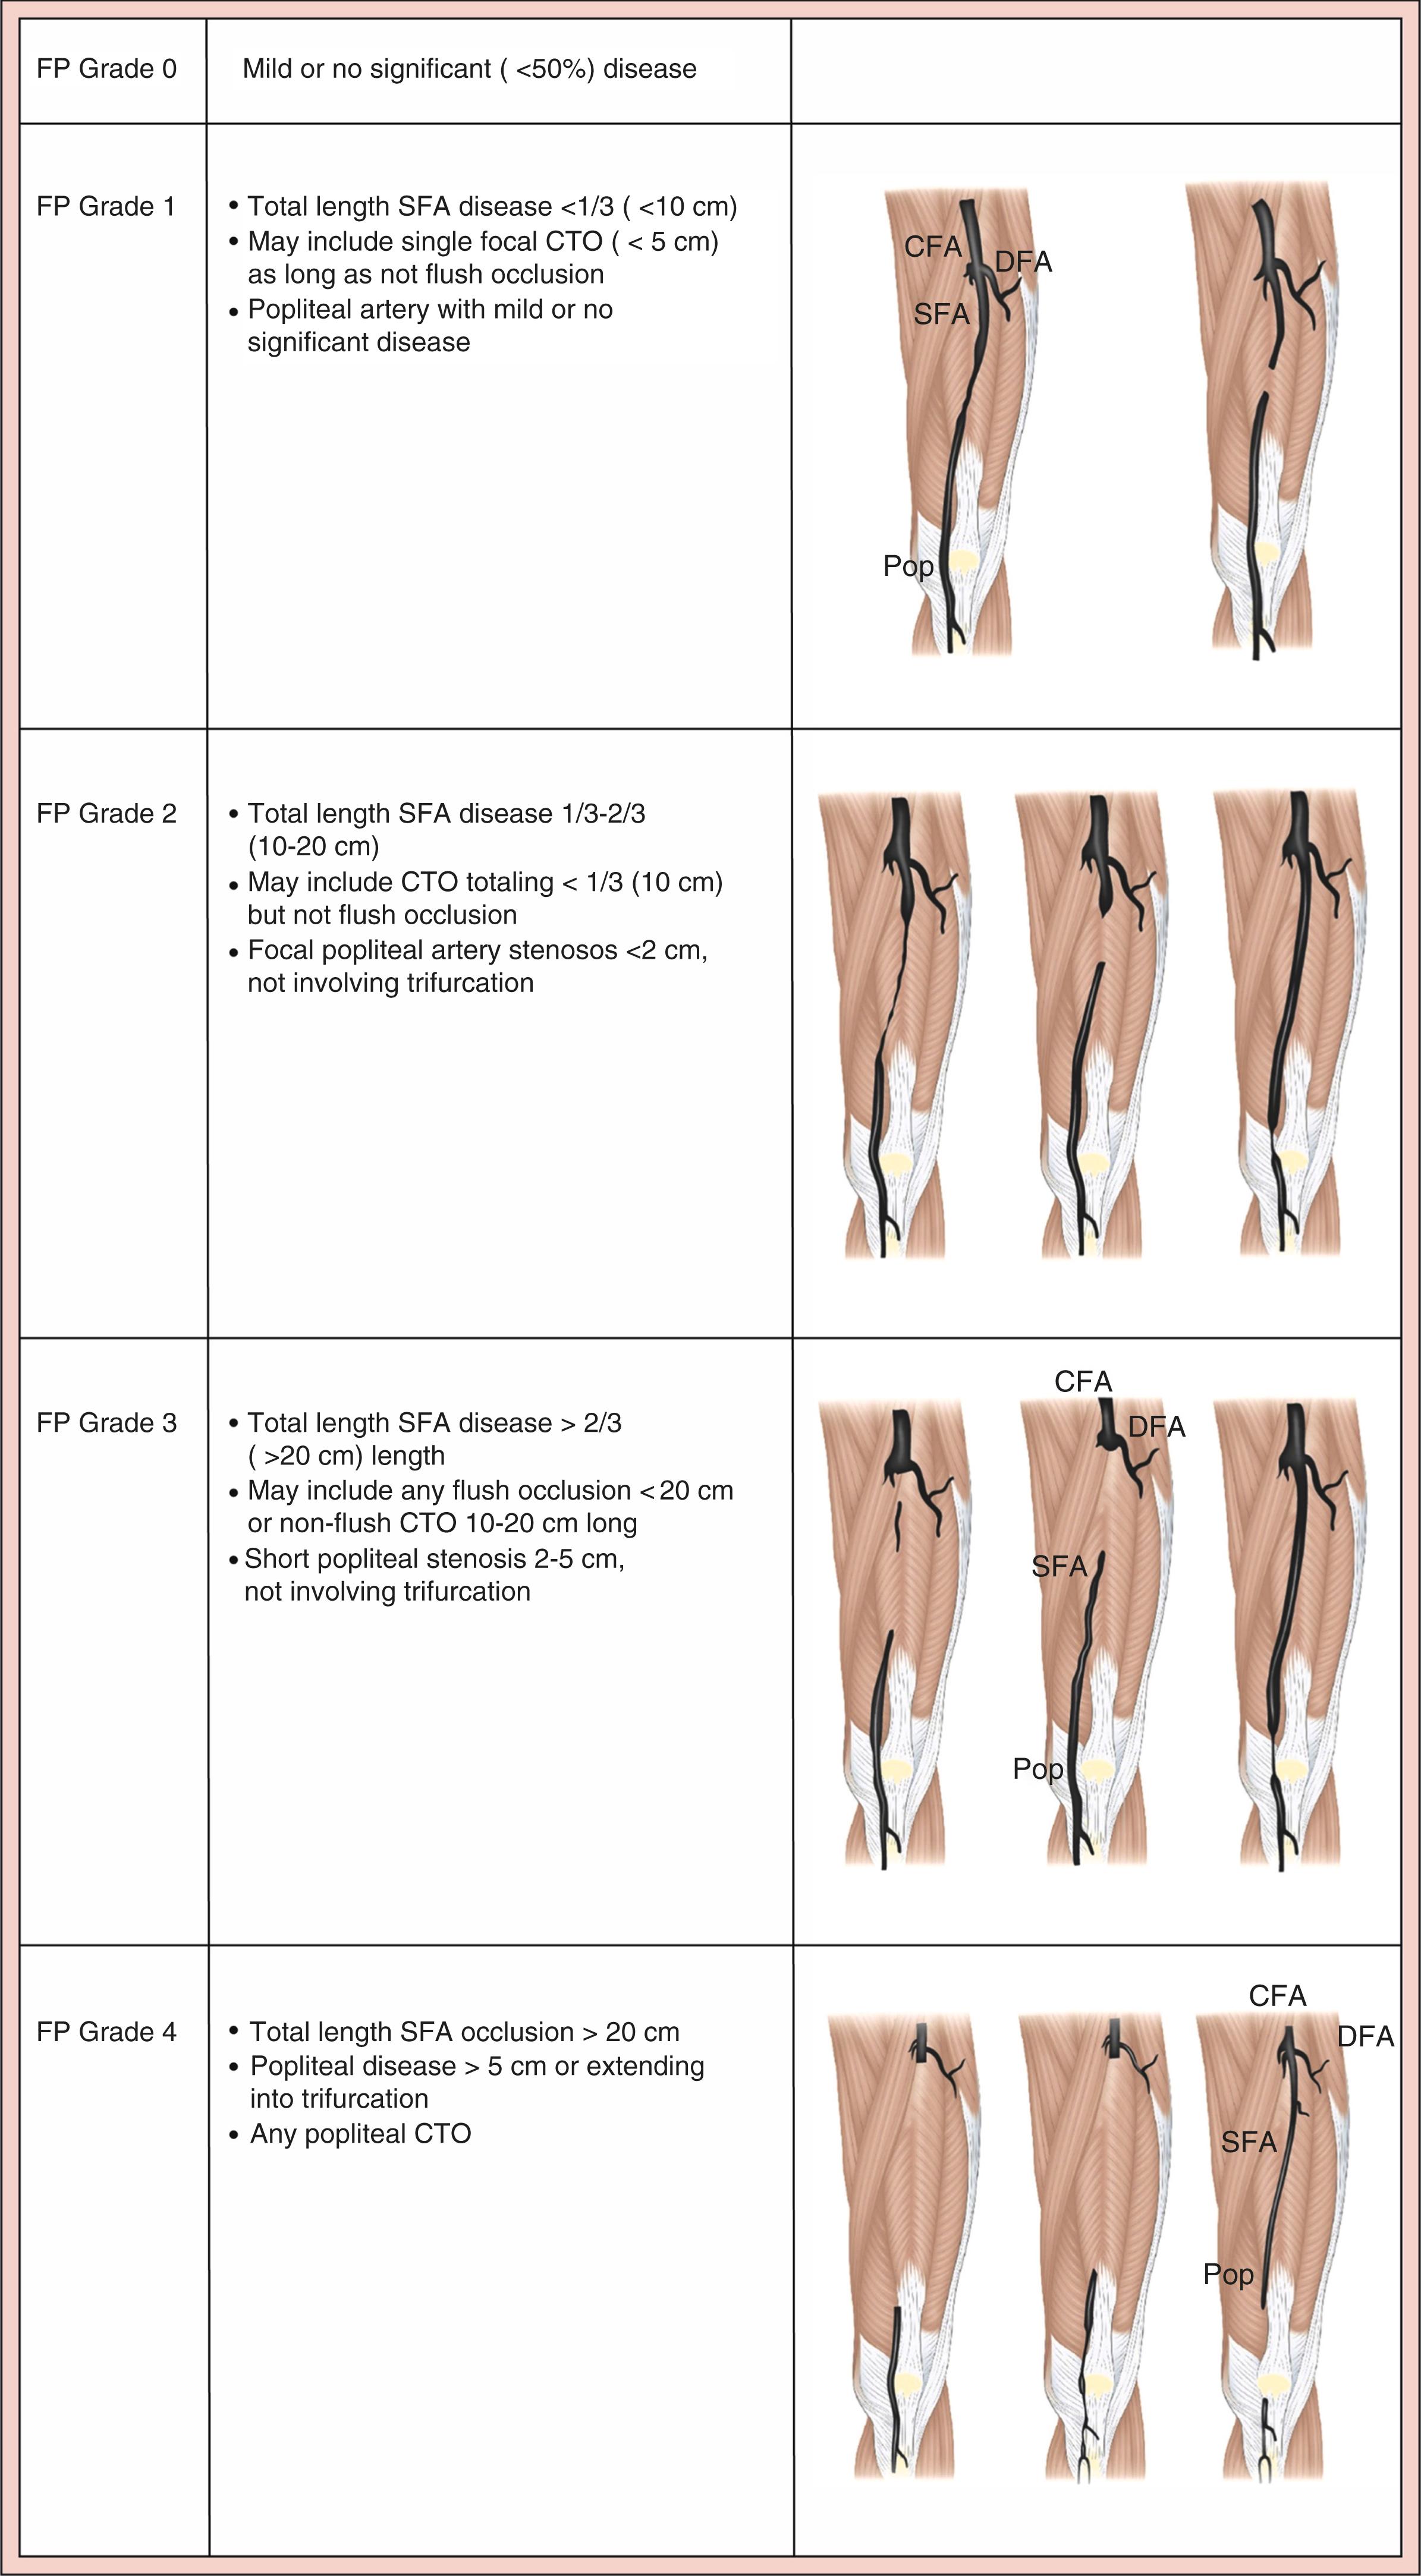 Figure 4.2, Femoropopliteal (FP) disease grading in Global Limb Anatomic Staging System (GLASS). Trifurcation is defined as the termination of the popliteal artery at the confluence of the anterior tibial (AT) artery and tibioperoneal trunk. CFA , Common femoral artery; CTO , chronic total occlusion; DFA , deep femoral artery; Pop , popliteal; SFA , superficial femoral artery.